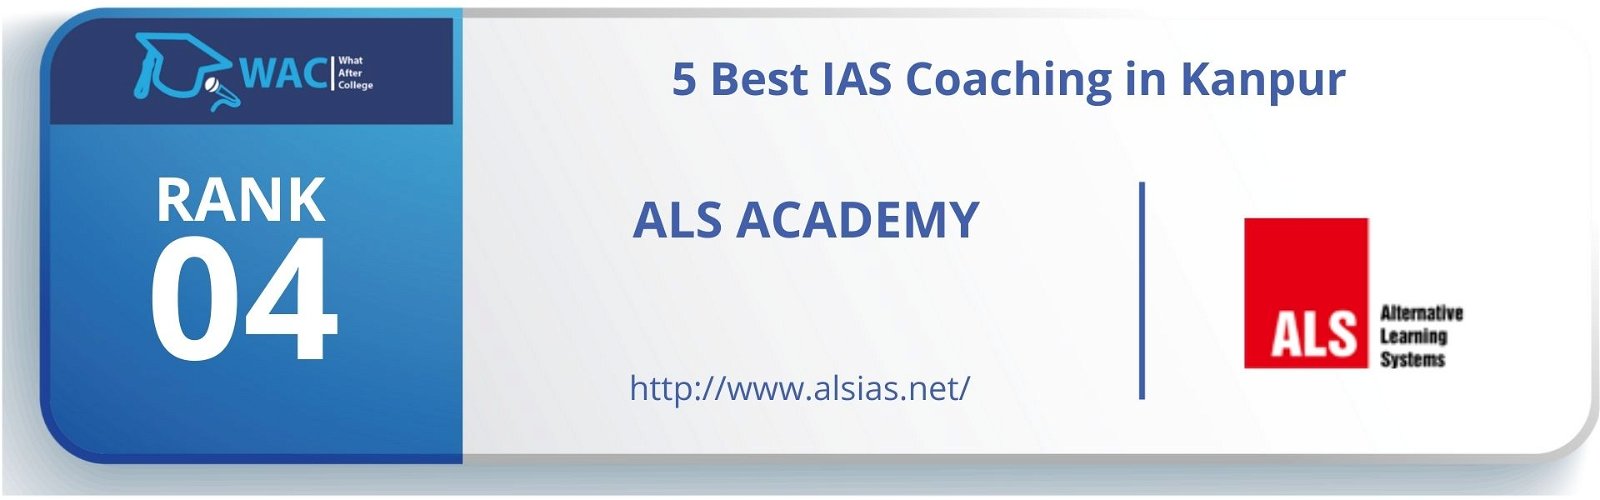 5Best IAS Coaching in Kanpur Rank 4: ALS Academy in Kanpur